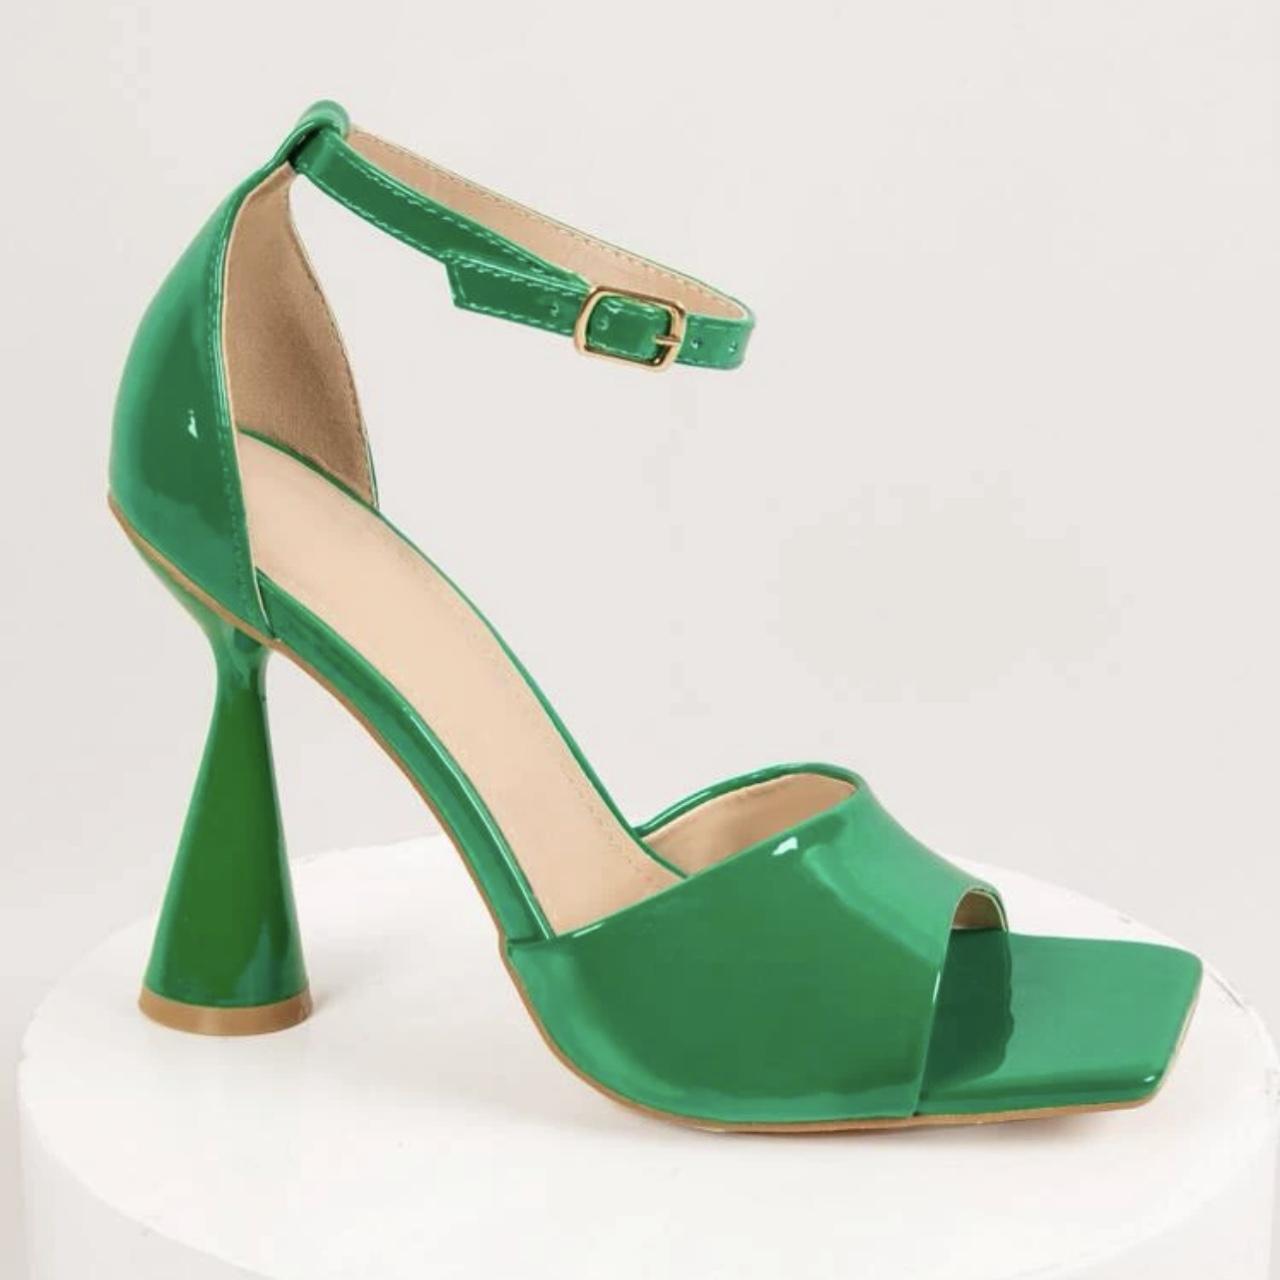 Patent leather sandals Escada Green size 38.5 EU in Patent leather - 7504650